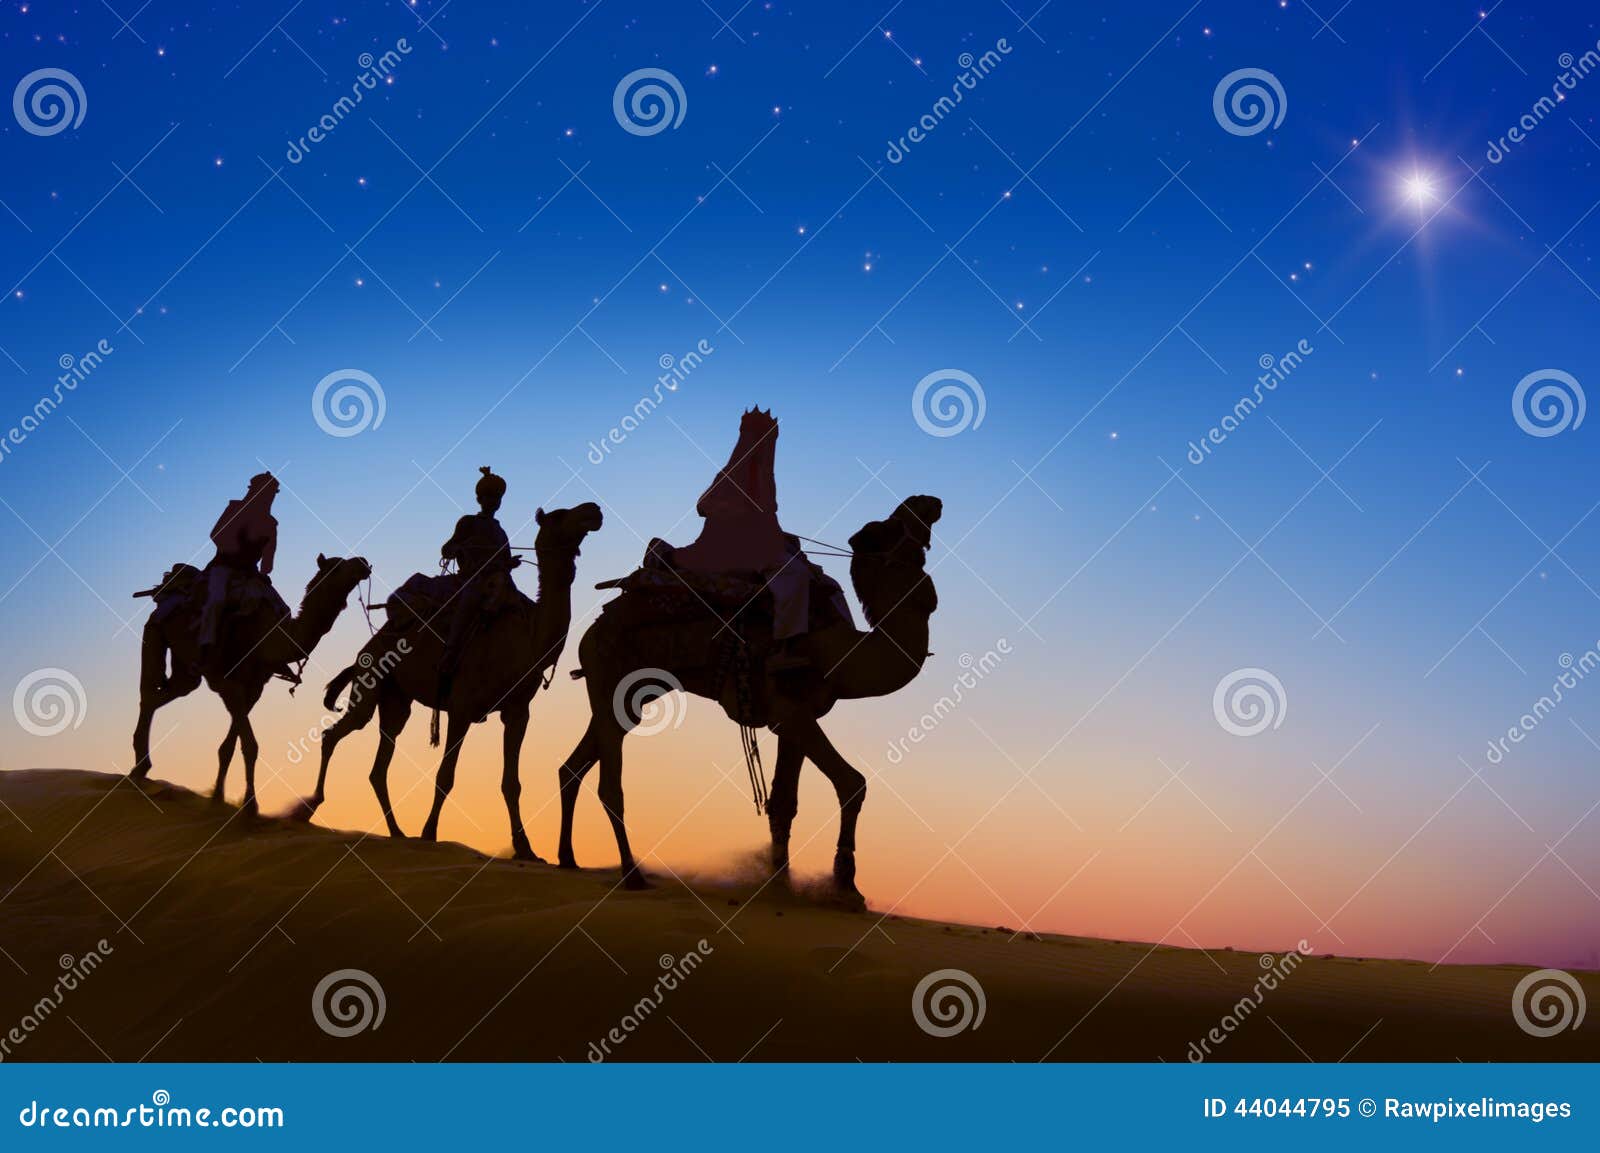 three wise men riding camel on the hill